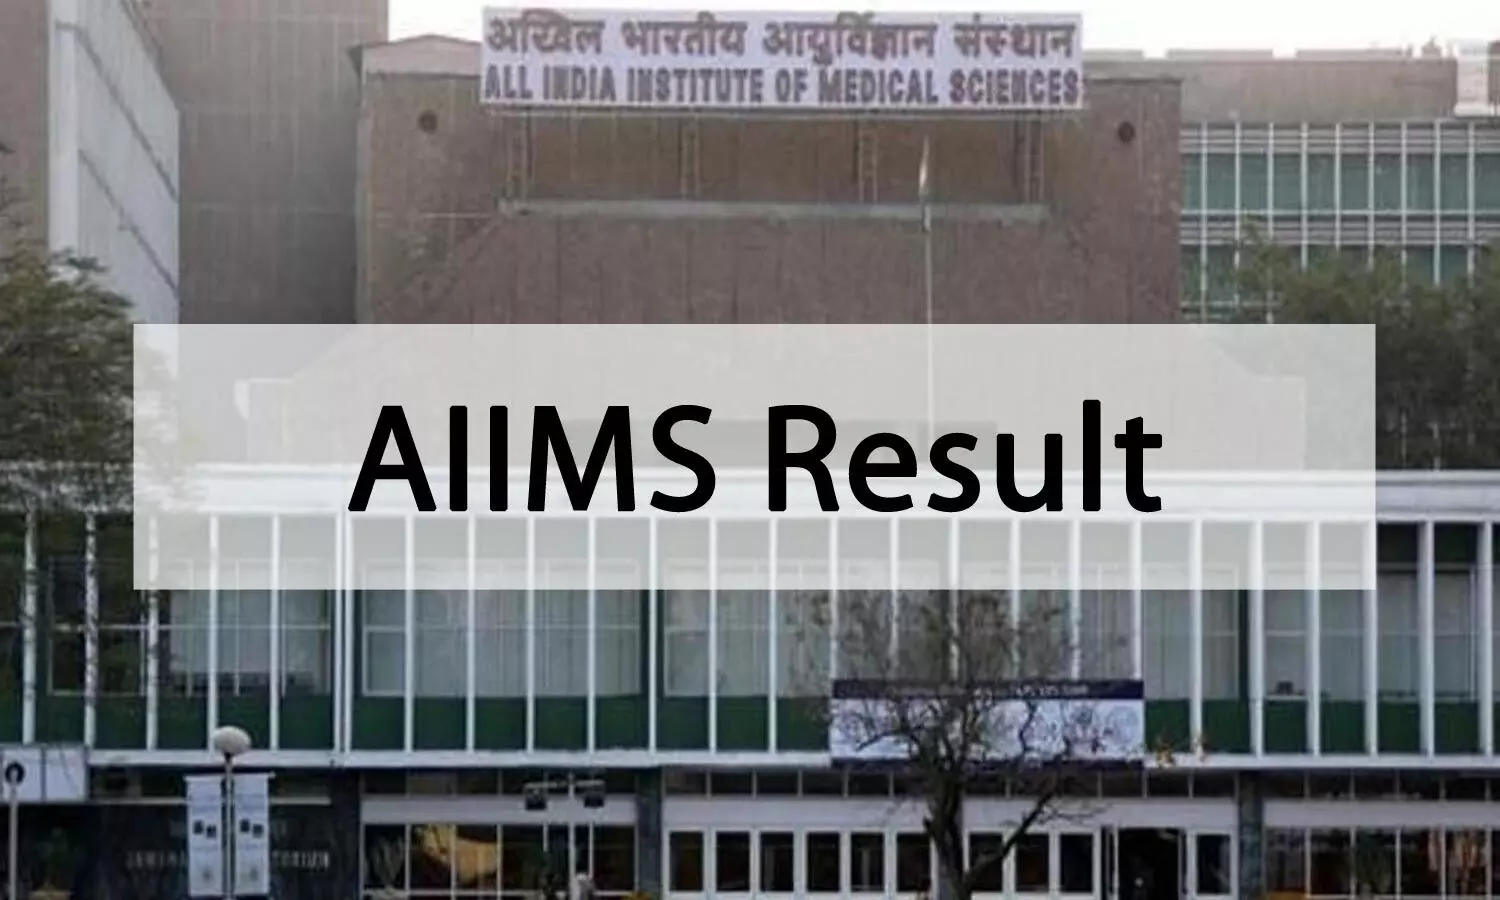 AIIMS releases results of 1st round counselling for BSc, Paramedical courses 2020